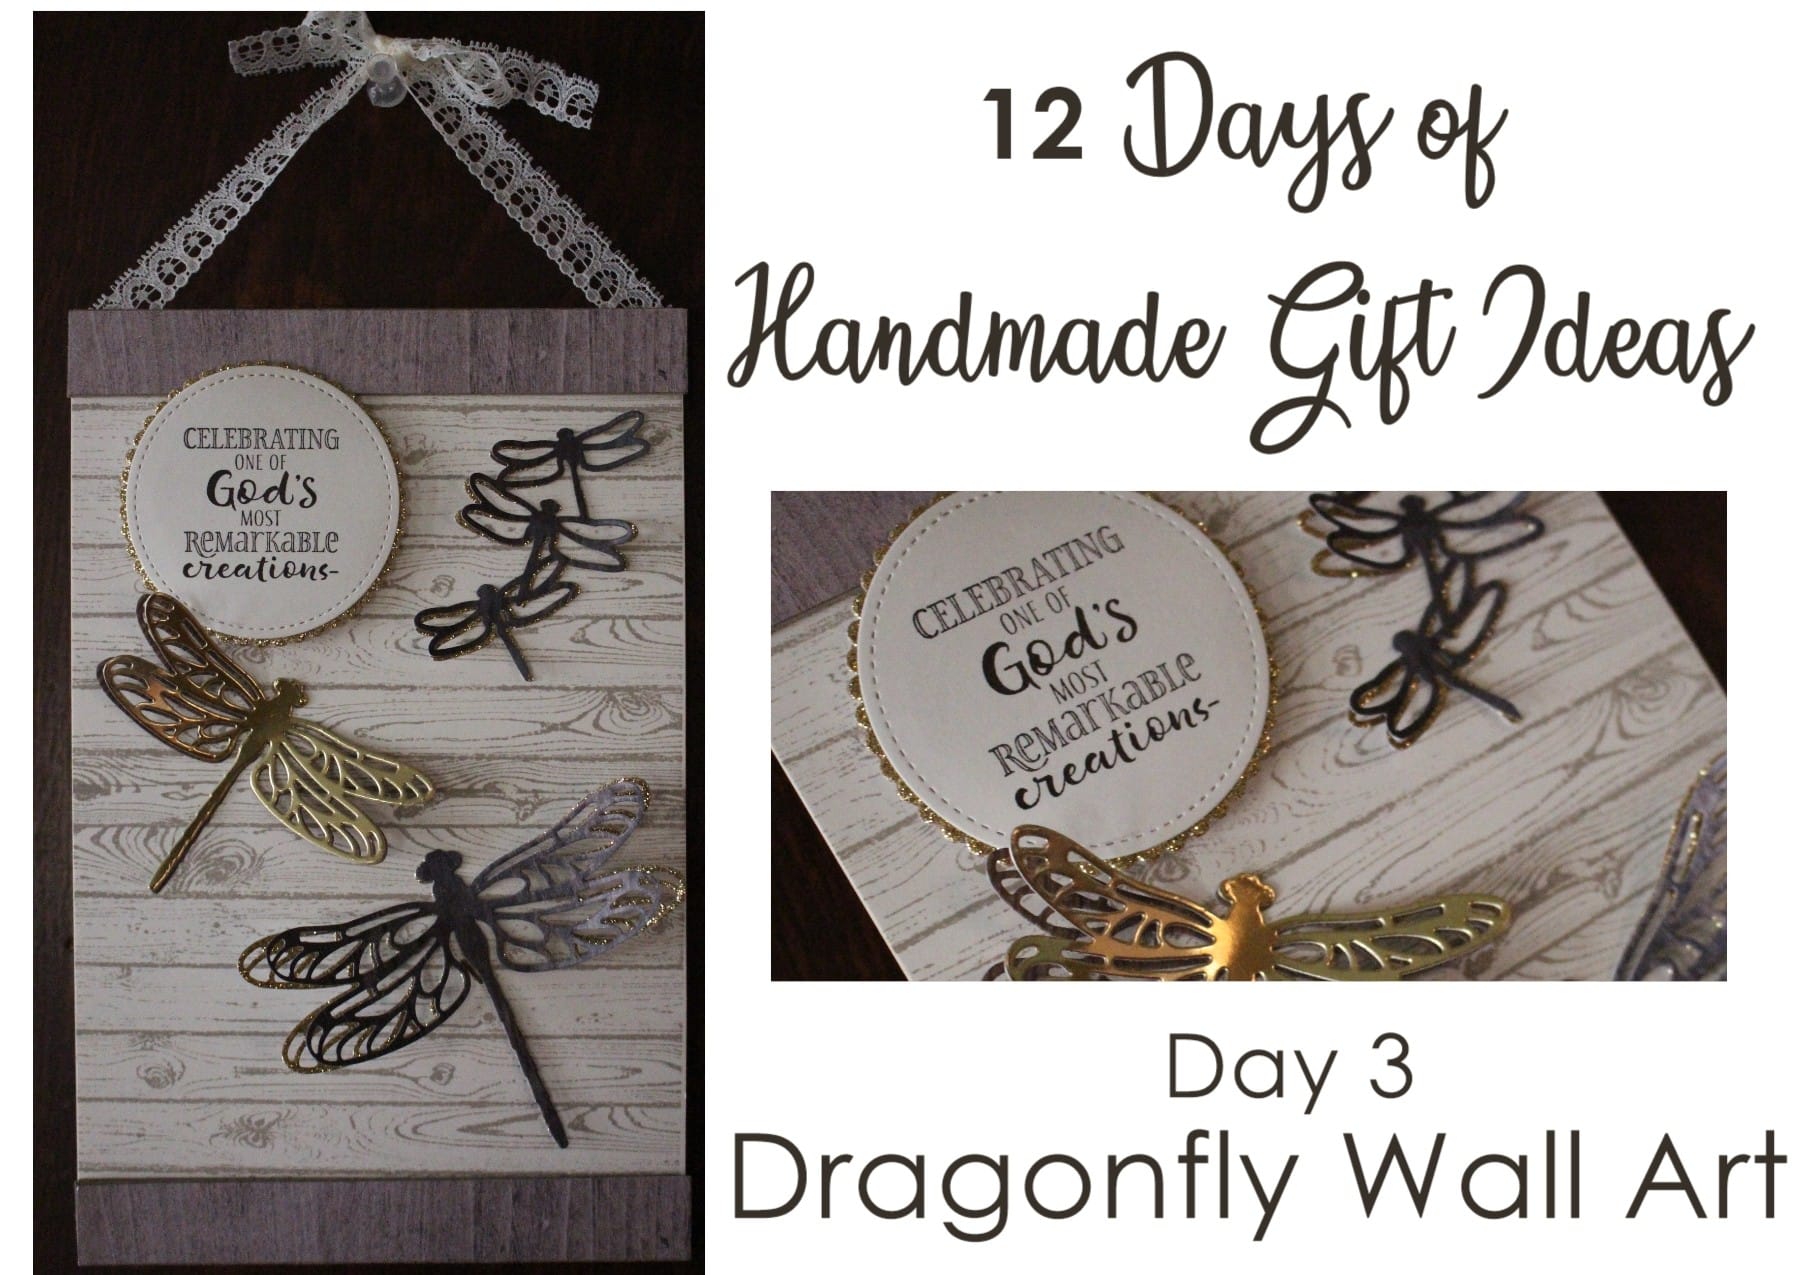 12 Day of Handmade Gift Ideas – Day 3 Dragonfly Wall Art